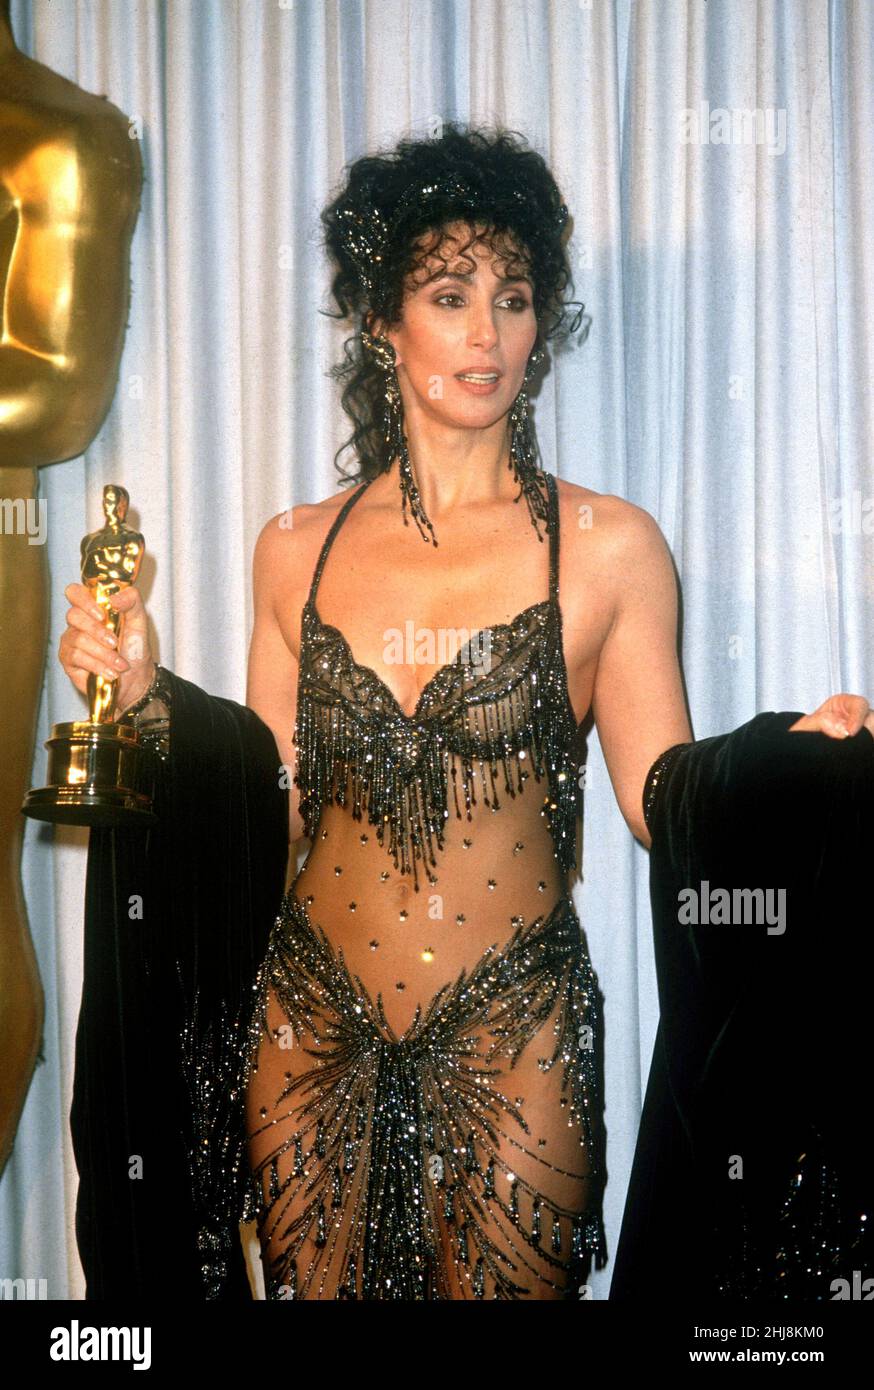 Cher at the Academy Awards for Best Actress for Moonstruck, 1988. Credit: Ron Wolfson / Rock Negatives / MediaPunch Stock Photo